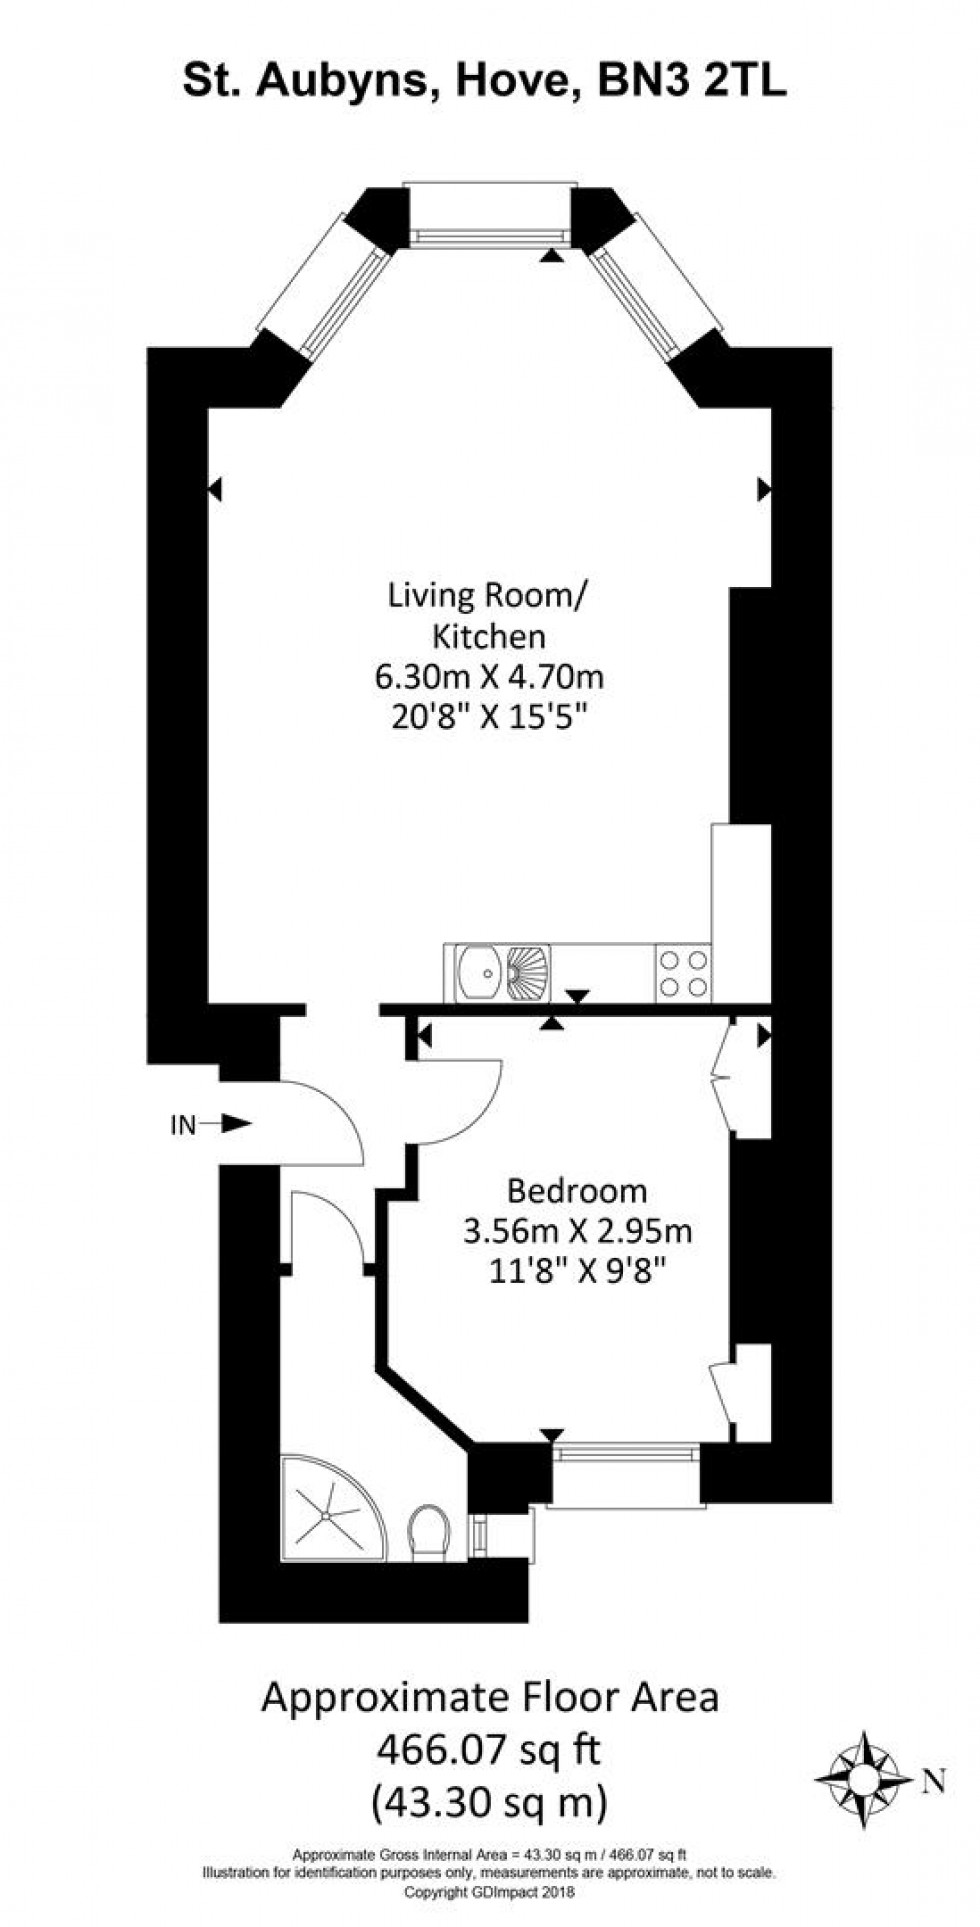 Floorplan for St. Aubyns, Hove